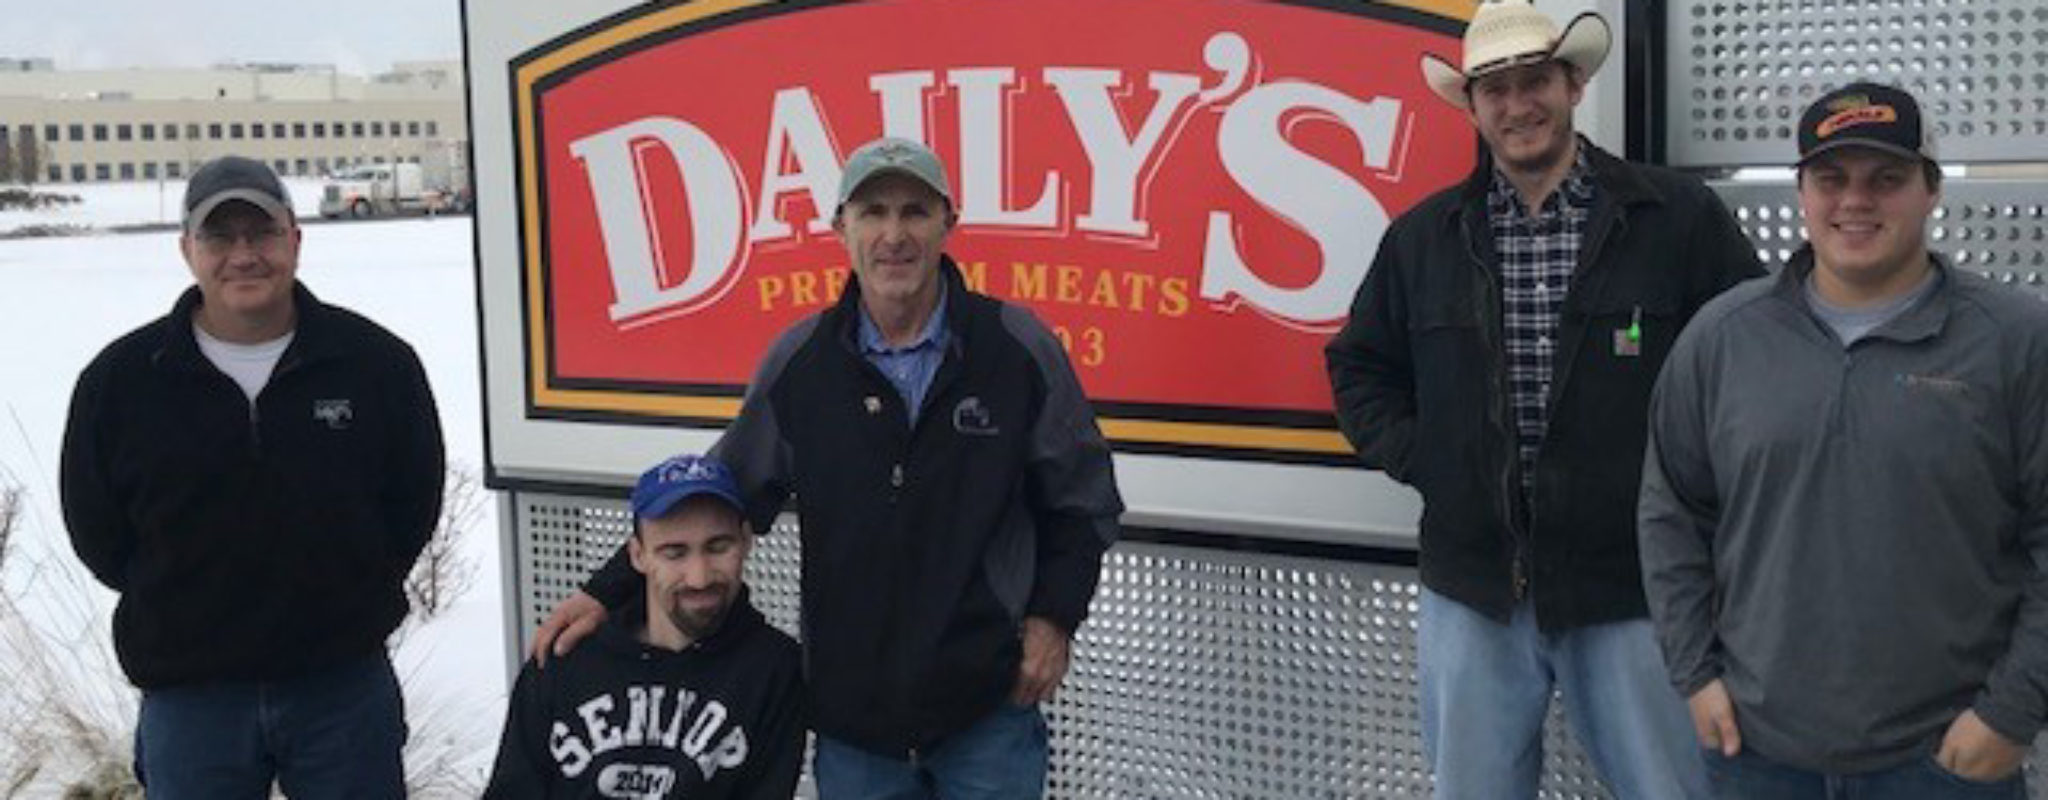 CF CONTRACT GROWERS TOUR TRIUMPH FOODS AND DAILY’S PREMIUM MEATS